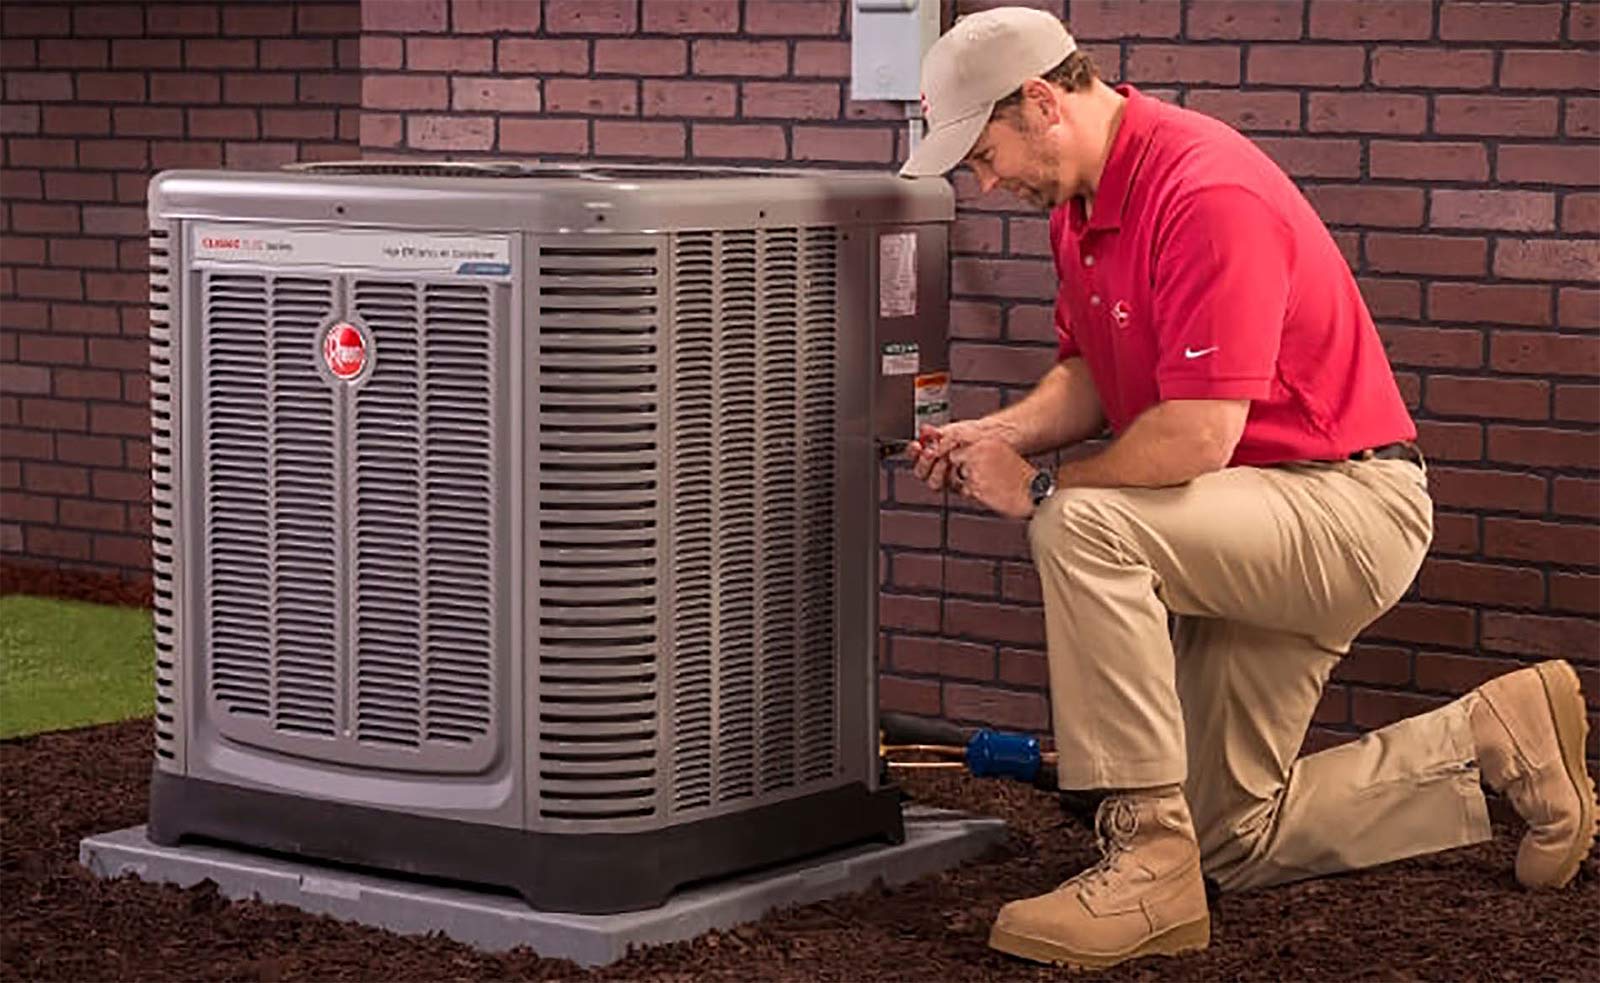 At 4 Seasons Air, we are your trusted HVAC Contractor in Centerburg, OH, serving all of Central Ohio and here to help you with all of your heating and cooling needs. Whether you need a new unit installed, preventative maintenance, or repairs, we have you covered. Our team of heating and cooling experts is dedicated to providing year-round comfort for both residential and commercial customers. From ensuring your HVAC system is running efficiently to offering professional duct cleaning services, we are here to meet all of your heating and cooling needs. With our expertise and attention to detail, you can trust us to keep your indoor environment comfortable and healthy. We have the ability to offer 24/7 emergency service as well as the ability to provide same-day service. Contact us today to schedule your service!